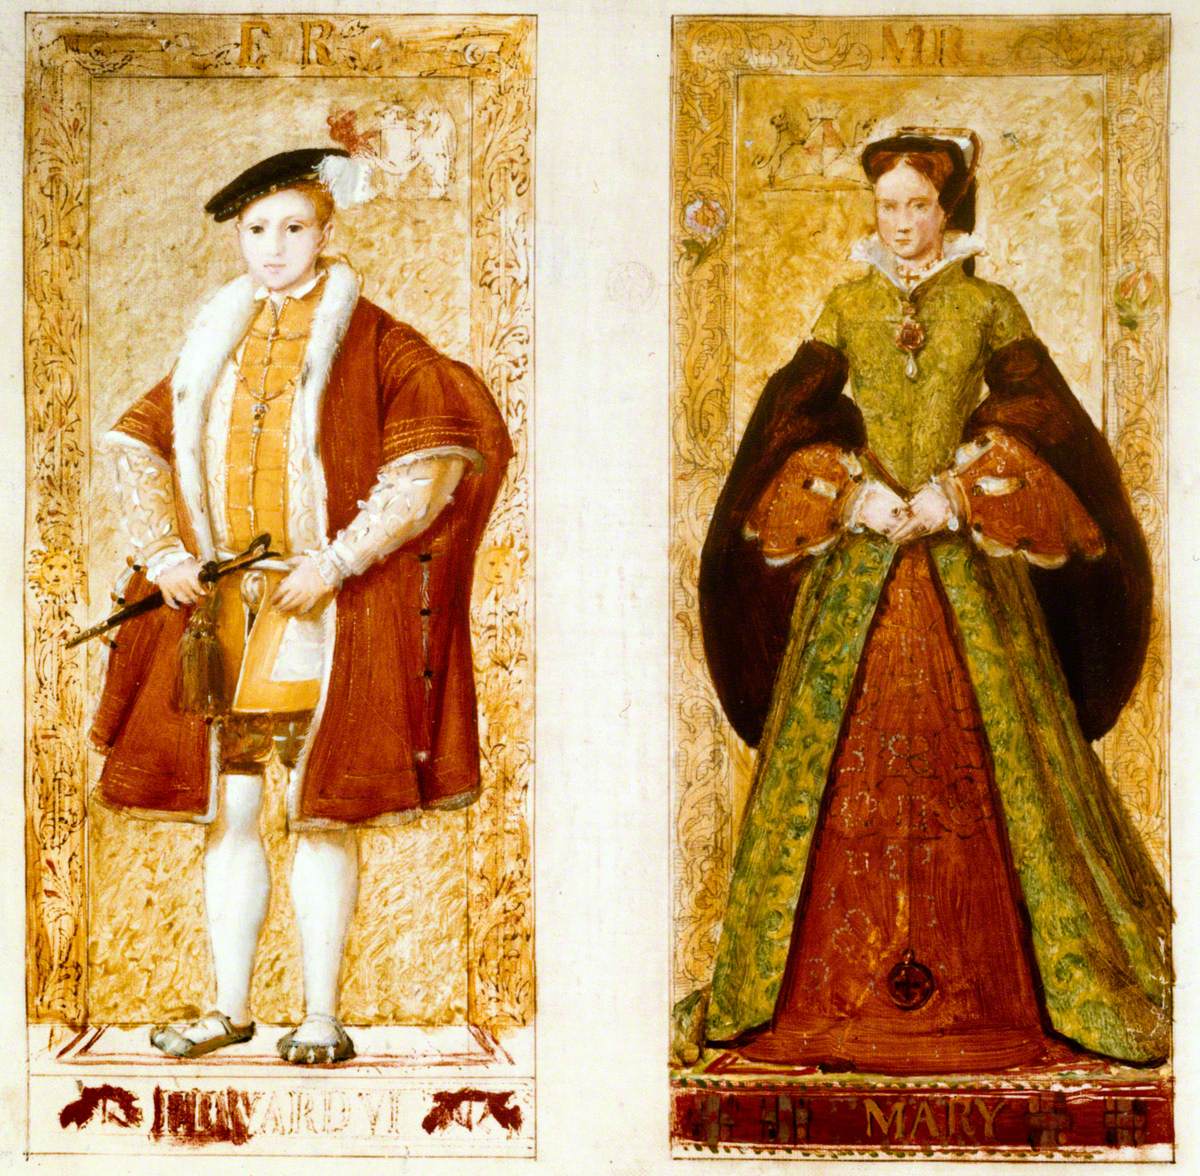 Preparatory Sketches of Edward VI and Mary I